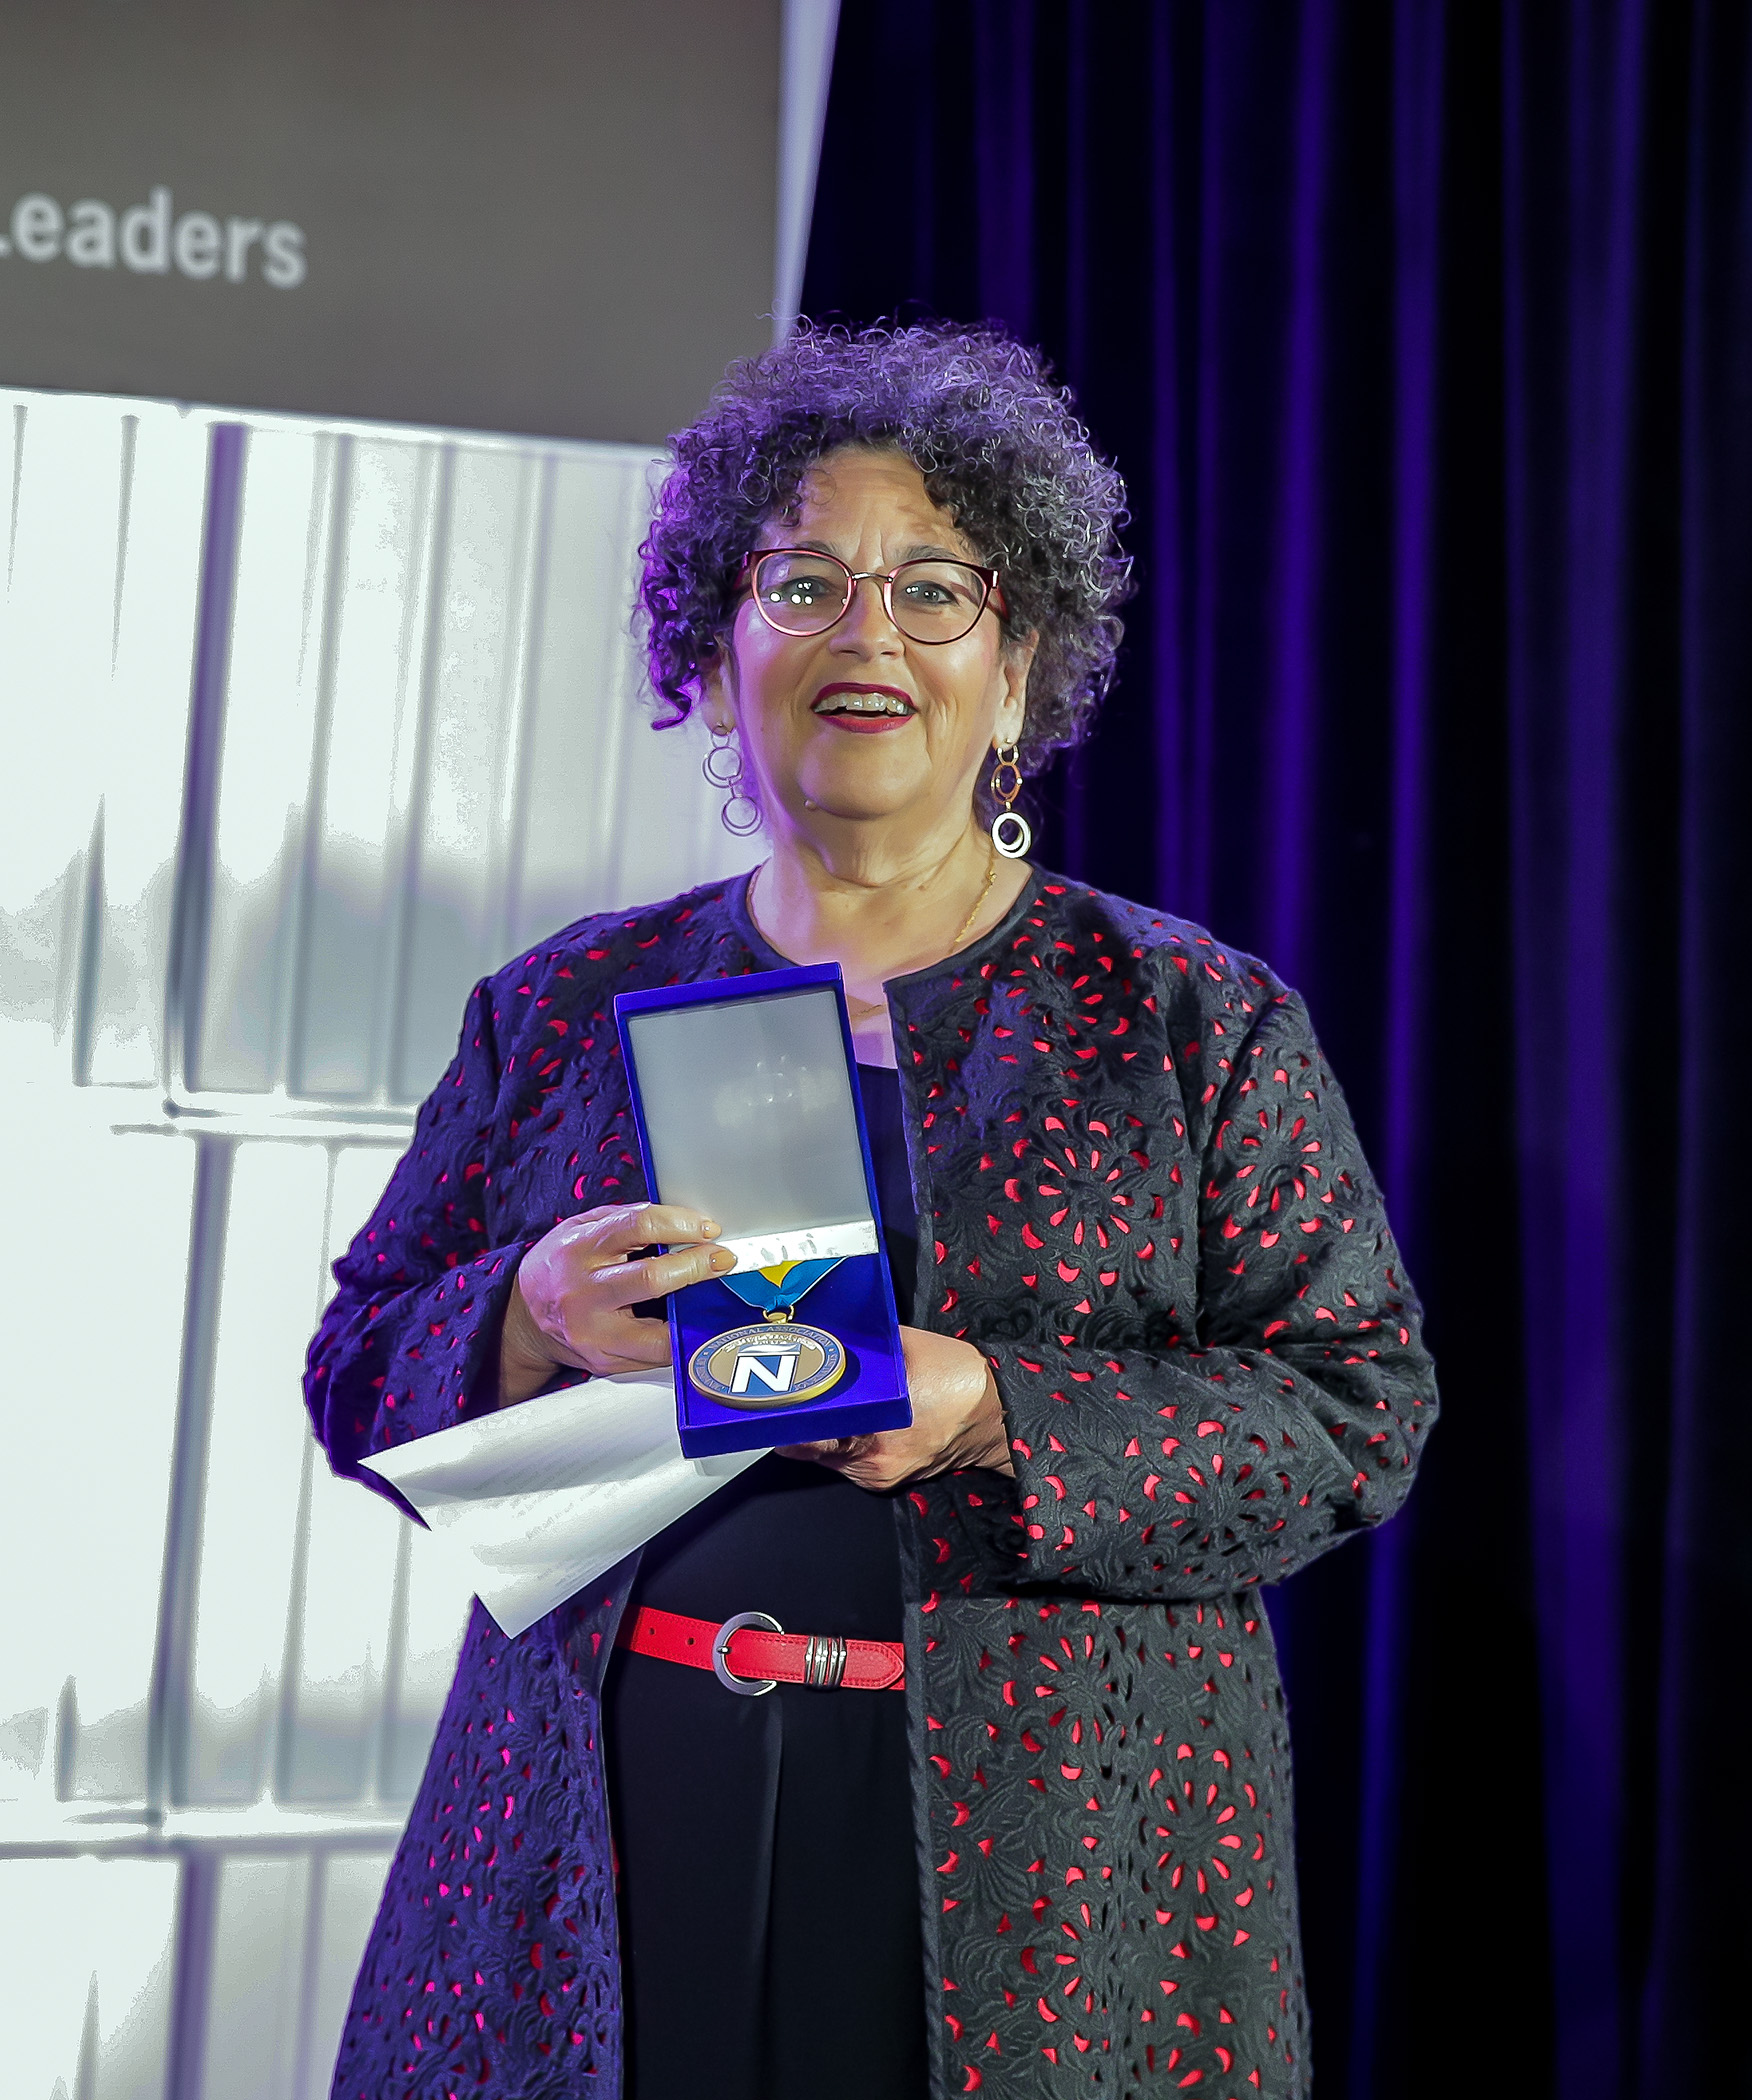 Diana R. Fuentes with her Hall of Fame induction medal at the 2022 NAHJ Hall of Fame Gala in Las Vegas, Nev., on Saturday, August 5, 2022.